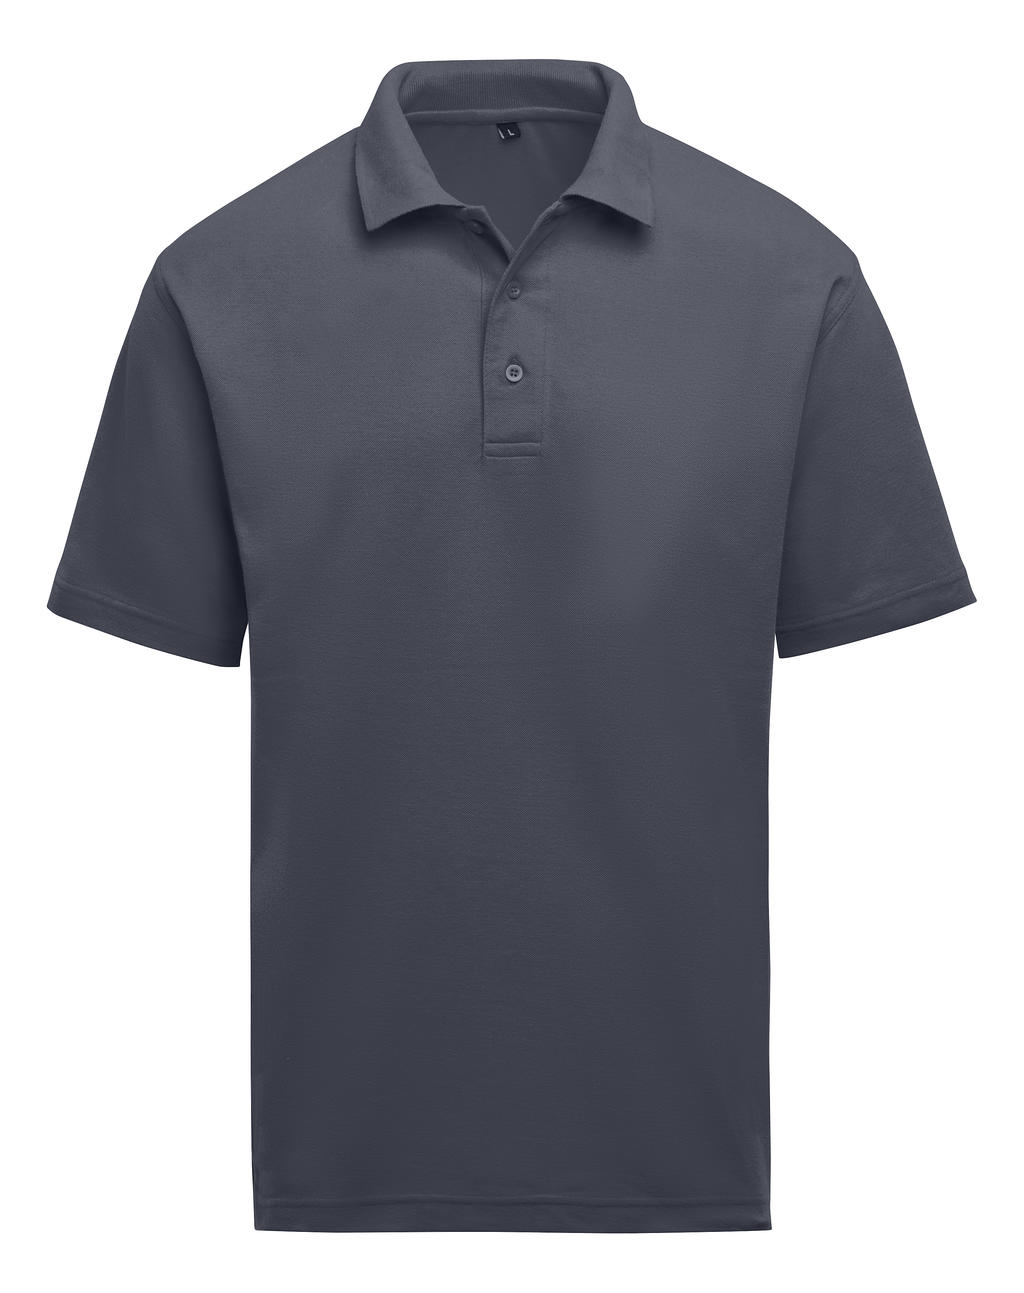  Unisex Polo in Farbe Charcoal 